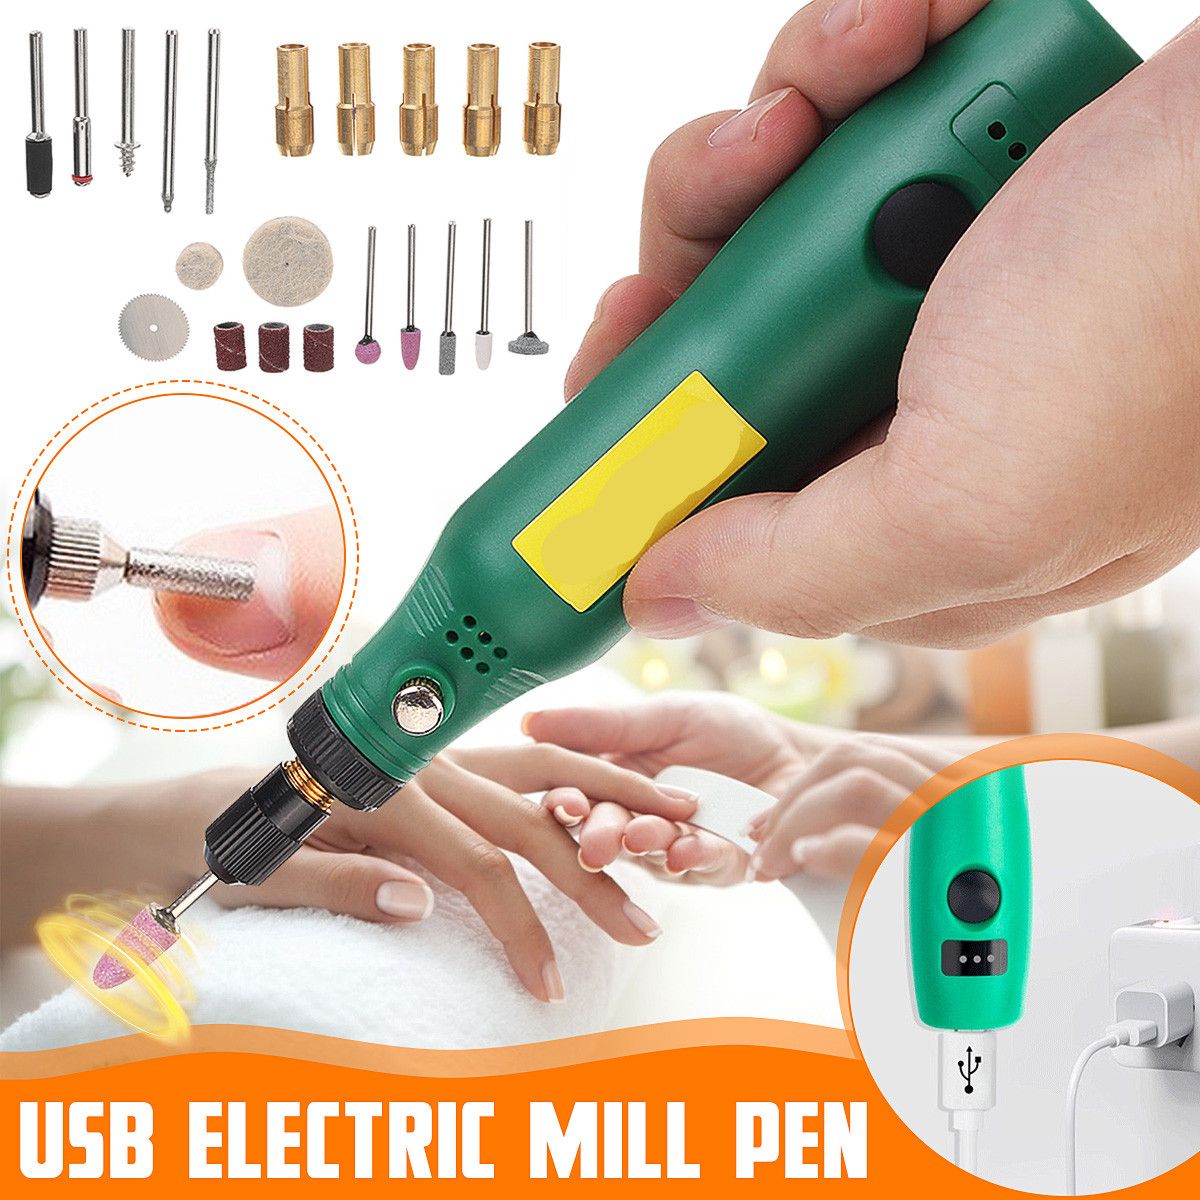 Rechargable-Adjustable-Speed-Grinder-Drill-Engraving-Pen-Mini-Electric-Drill-Grinder-Carving-Polishi-1621863